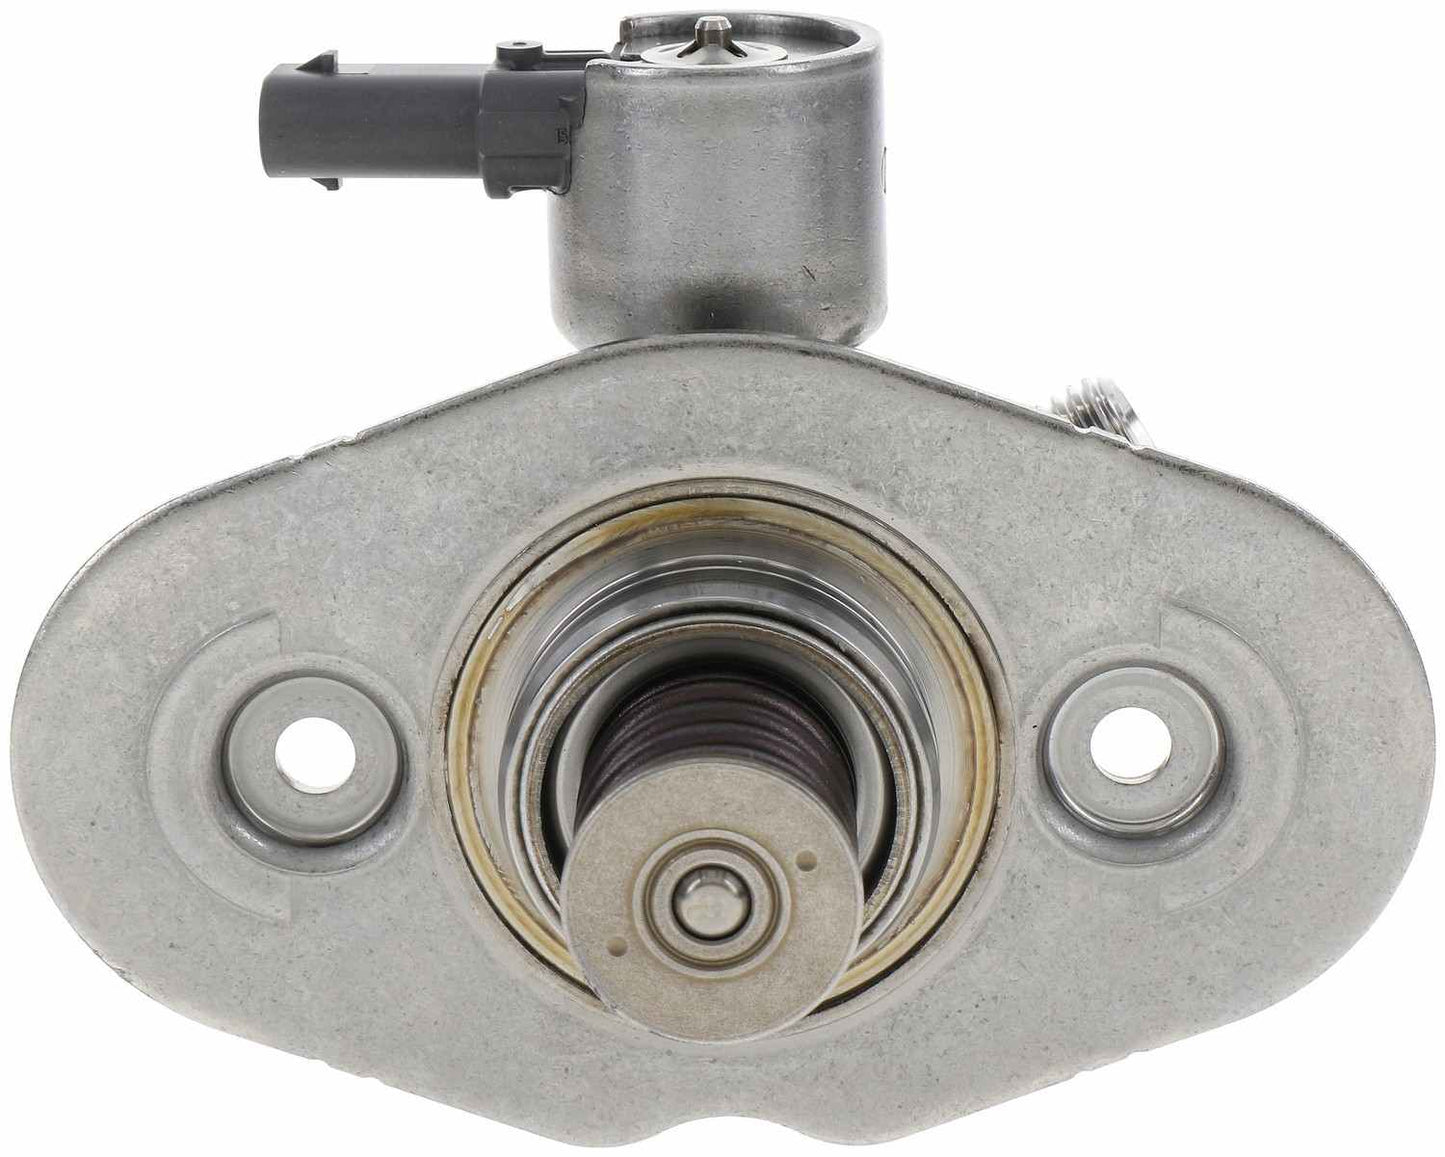 Front View of Direct Injection High Pressure Fuel Pump BOSCH 66828